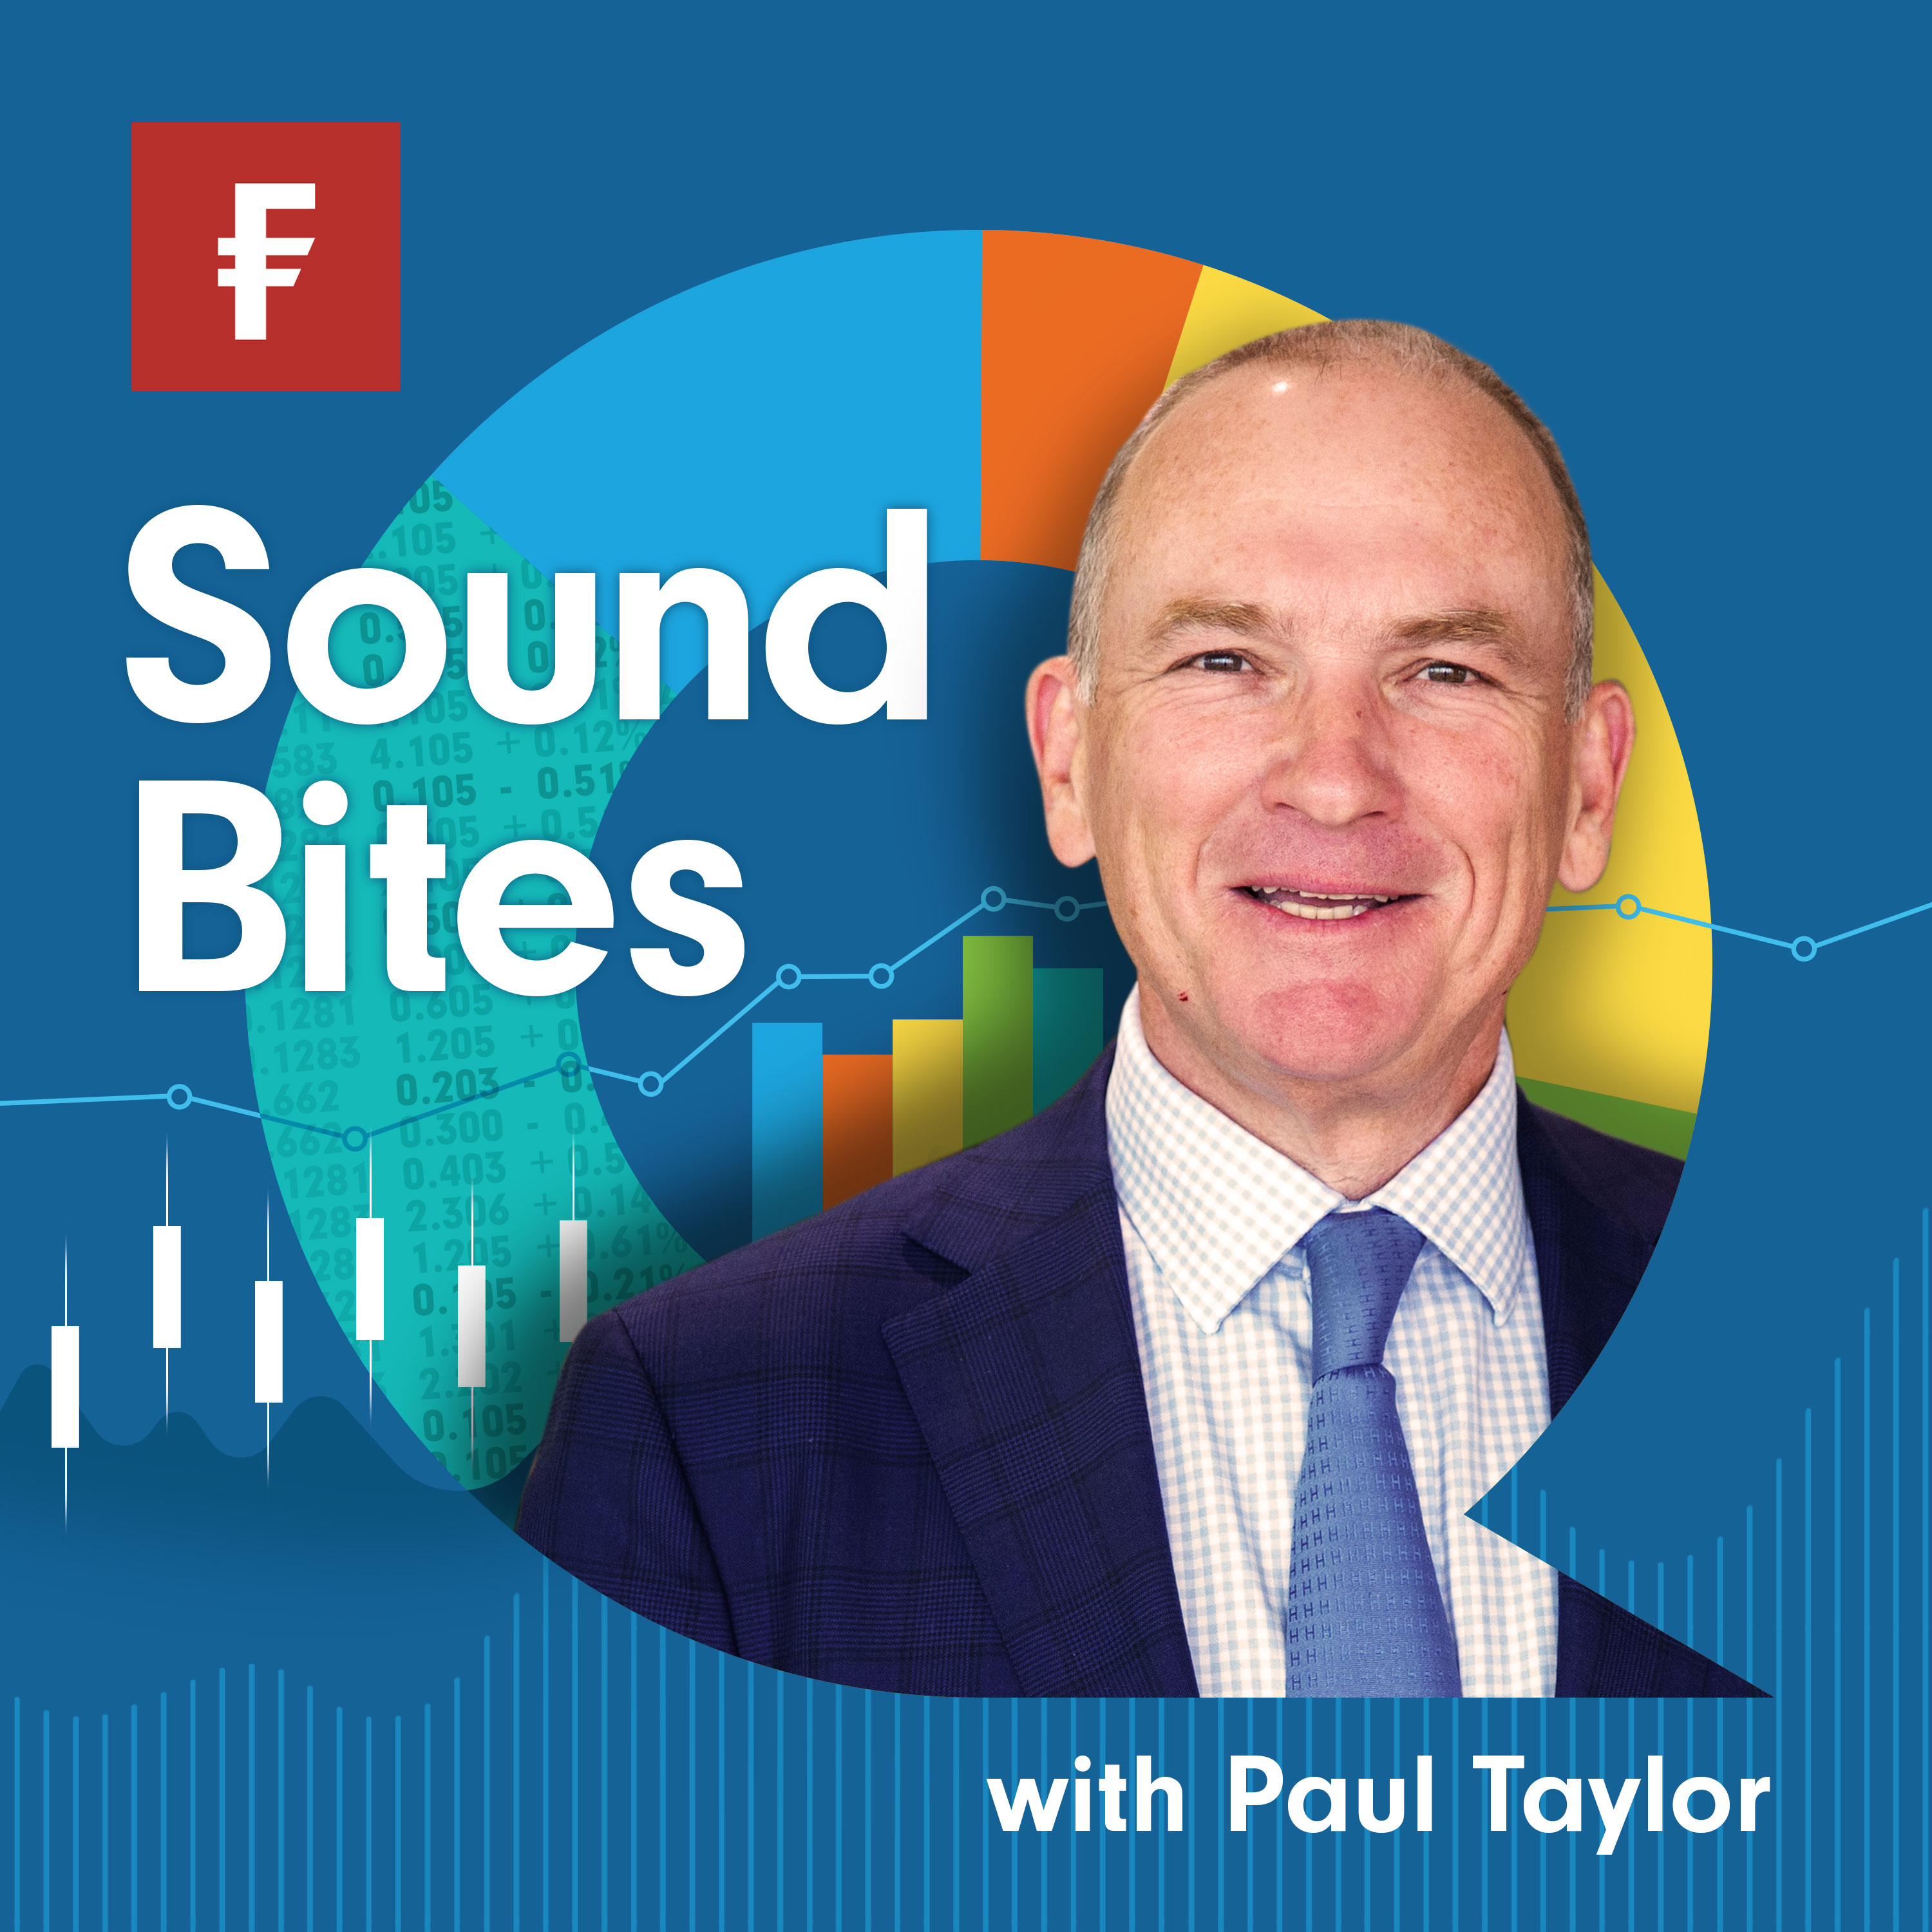 Paul Taylor | Investing in property when rates are rising? | Goodman Group, Blackmores & Silk Laser